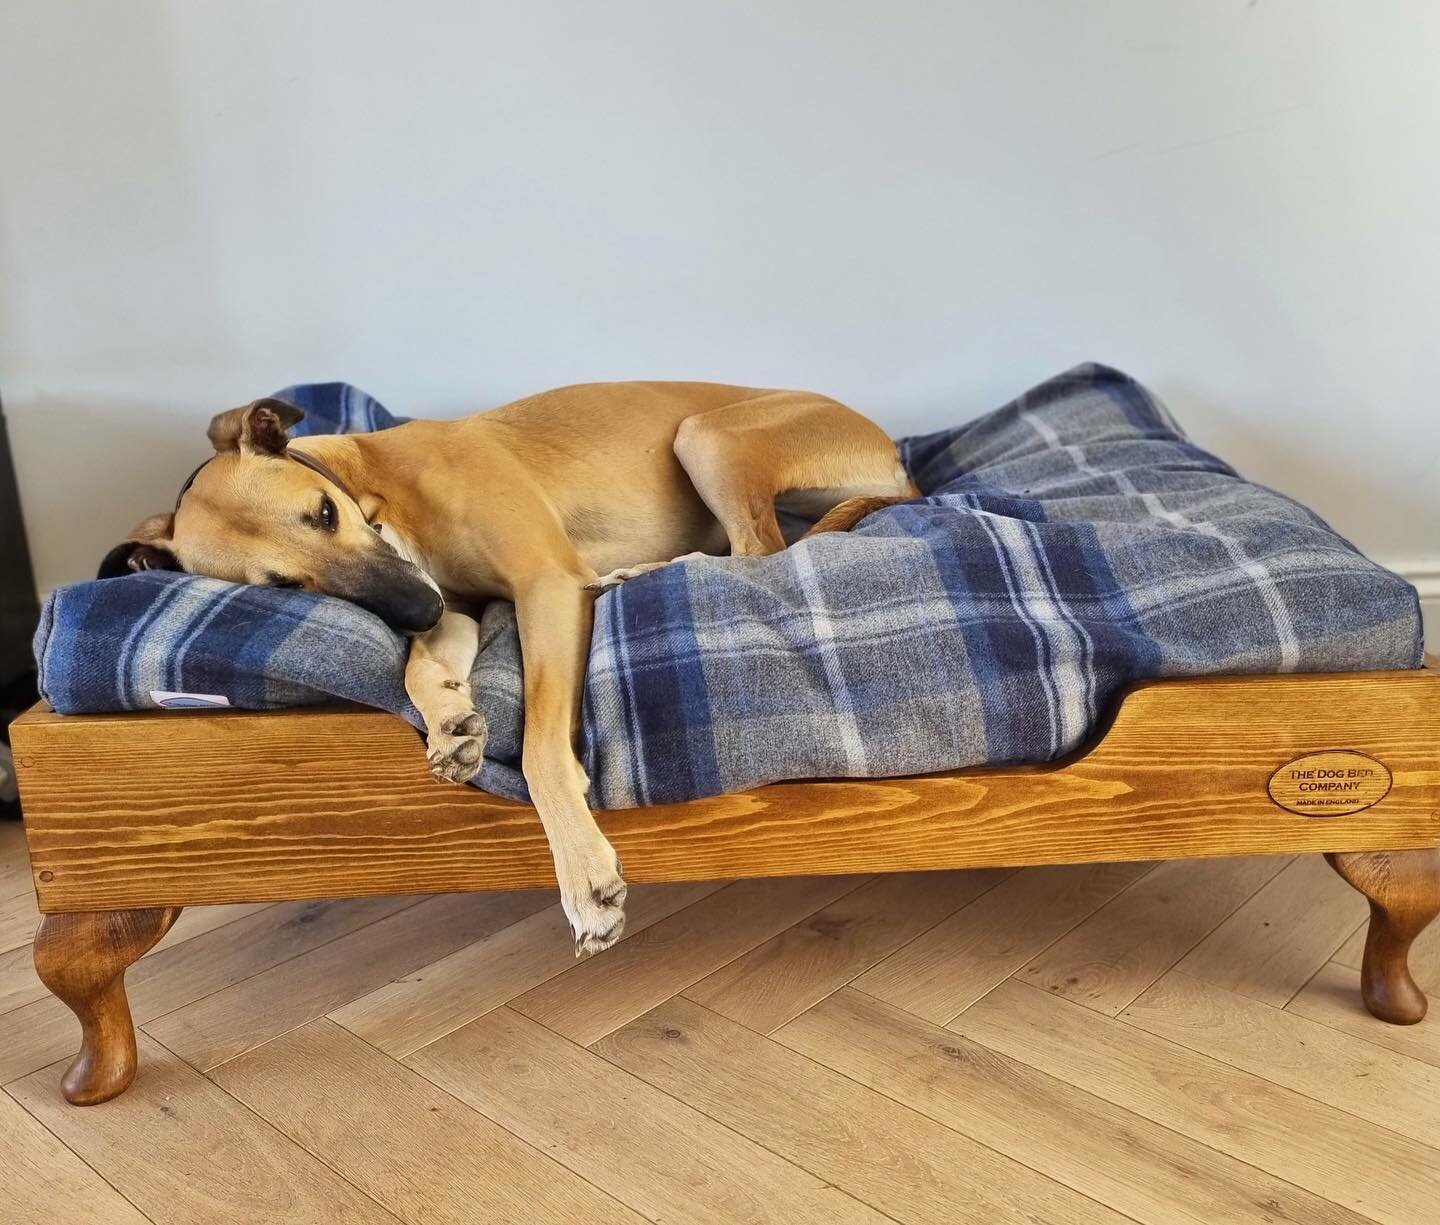 Don&rsquo;t you wish you could sleep so comfortably?  Just raising the deep filled mattress off the floor provides the warmth, air flow and security that our dogs need for rest and relaxation.  Just like our own beds!!! #luxurydogbed #raiseddogbed #h